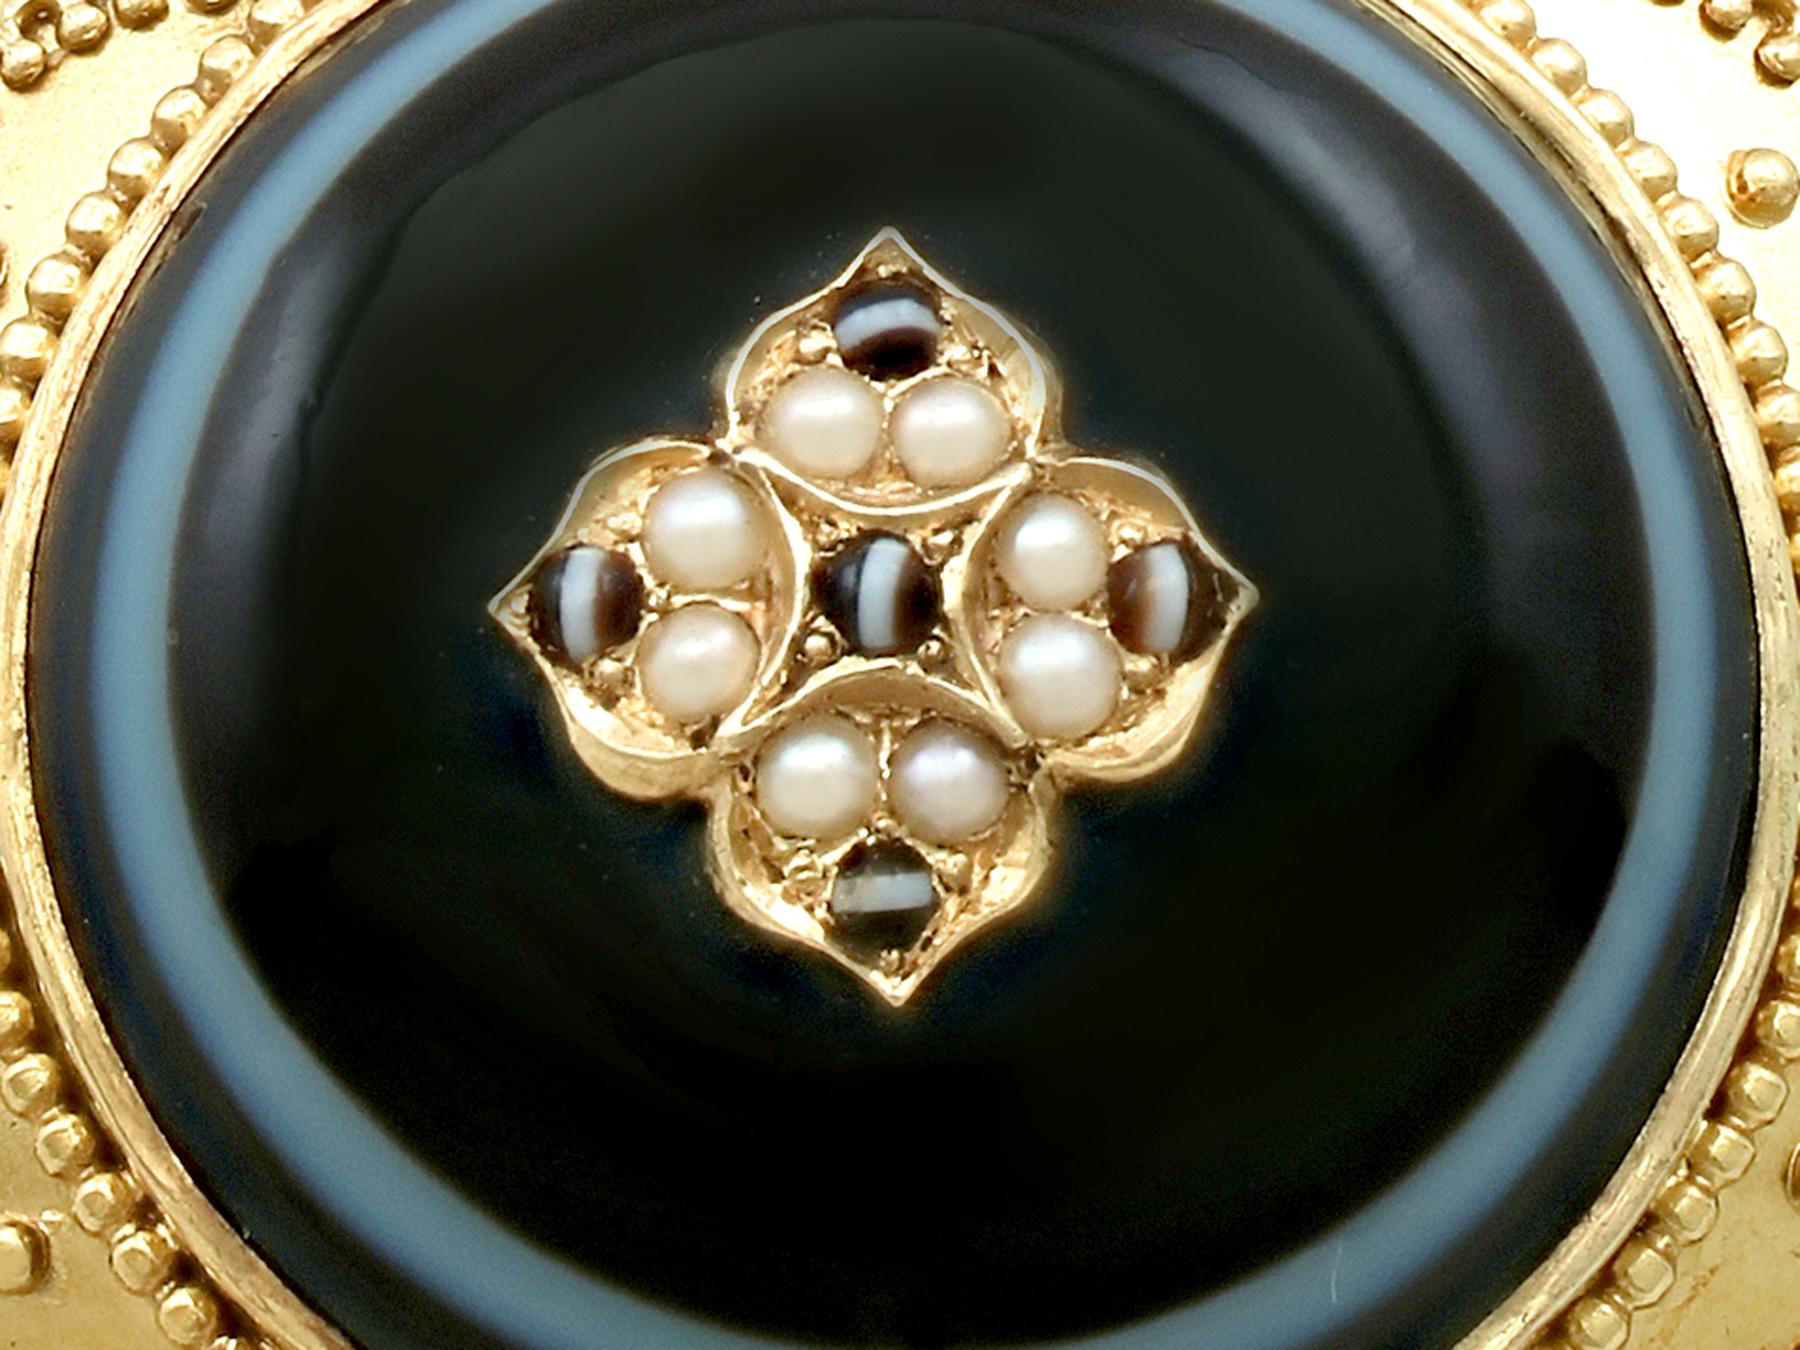 An exceptional, fine and impressive antique Victorian agate and seed pearl, 18 karat yellow gold locket style brooch; part of our antique jewelry and estate jewelry collections

This exceptional, fine and impressive locket style Victorian agate